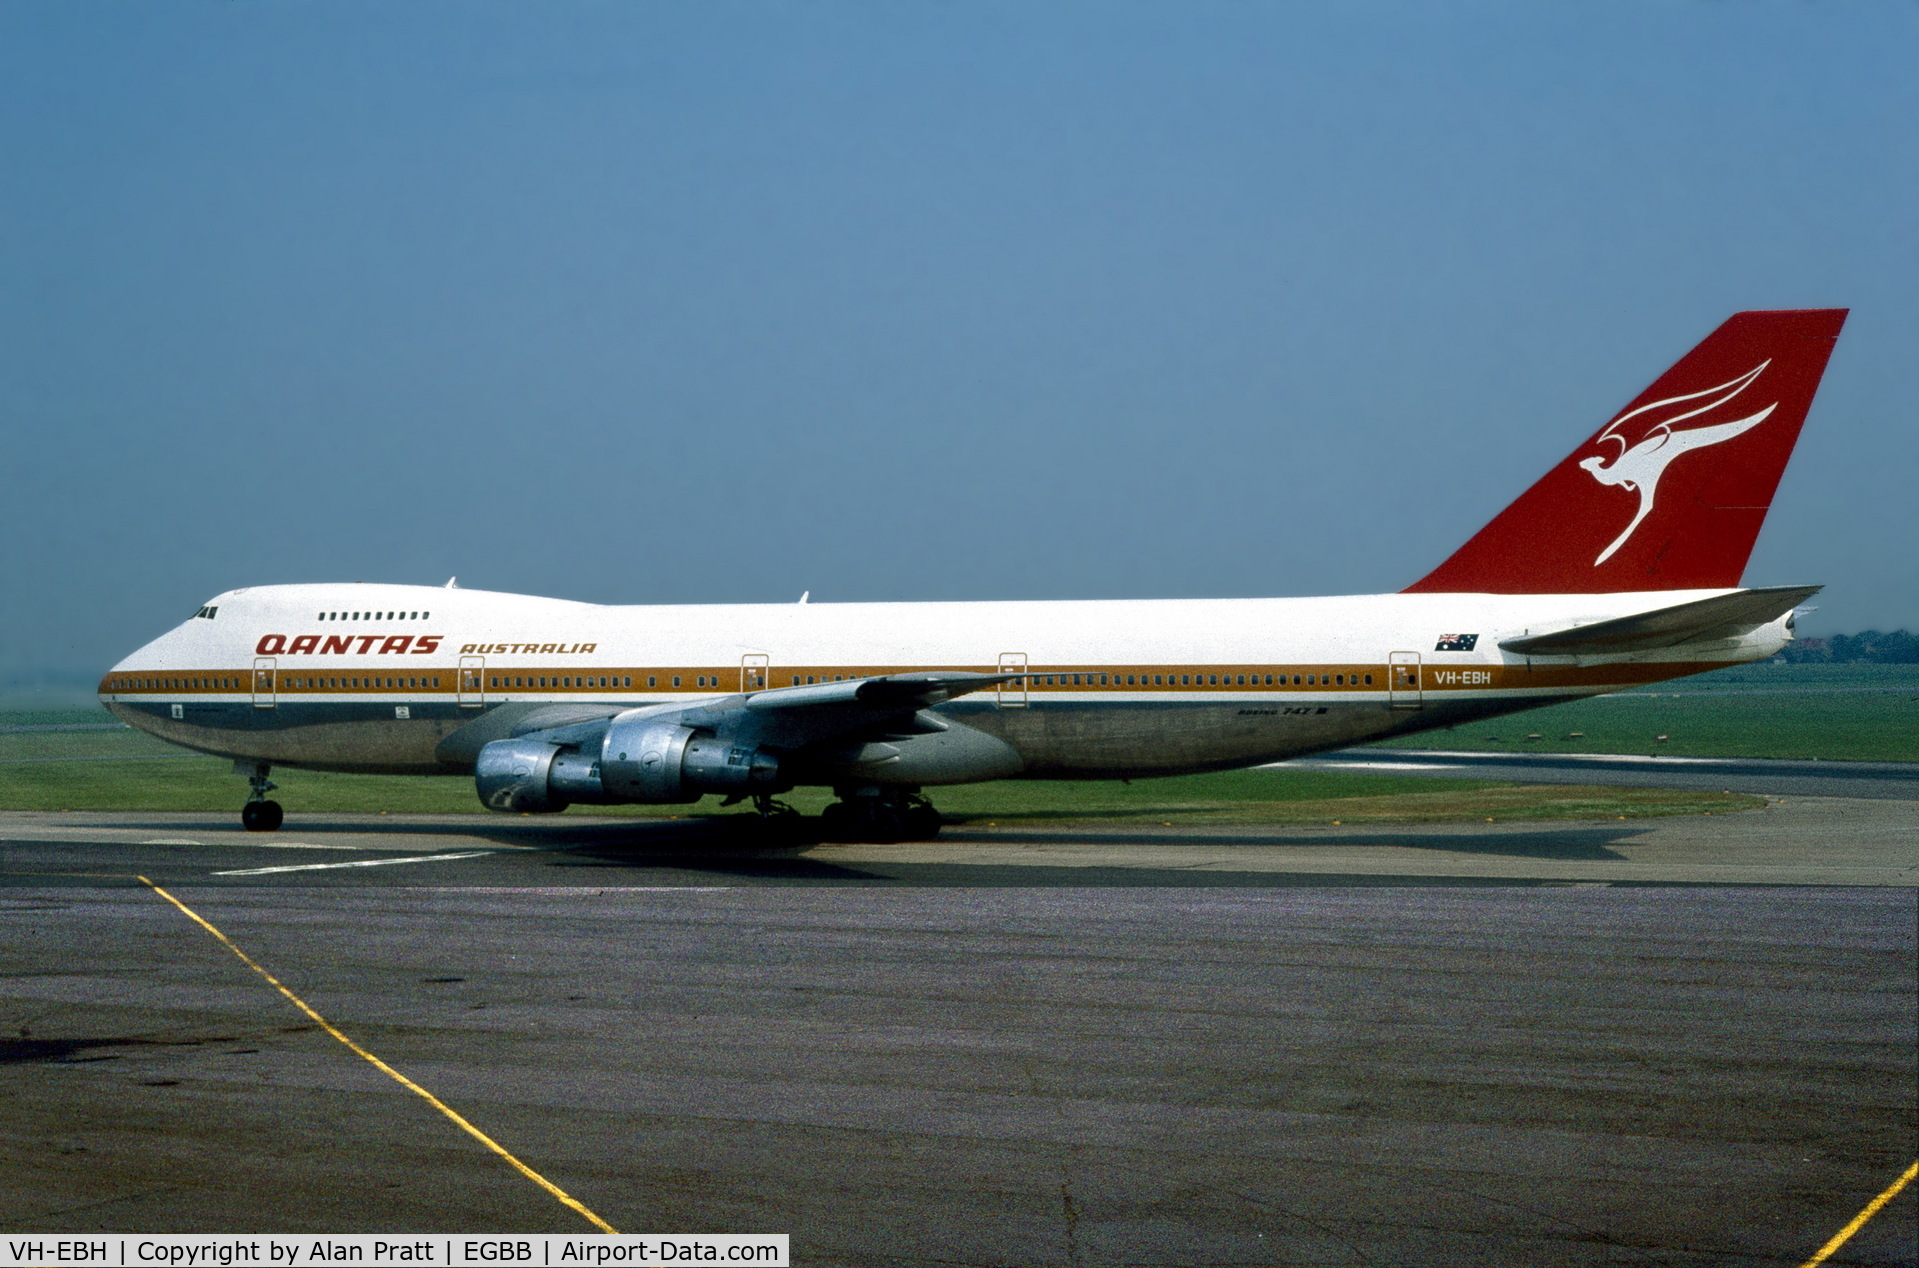 VH-EBH, 1974 Boeing 747-238B C/N 20842, The first B747 to land at Birmingham sometime in the second half of 1970`s.